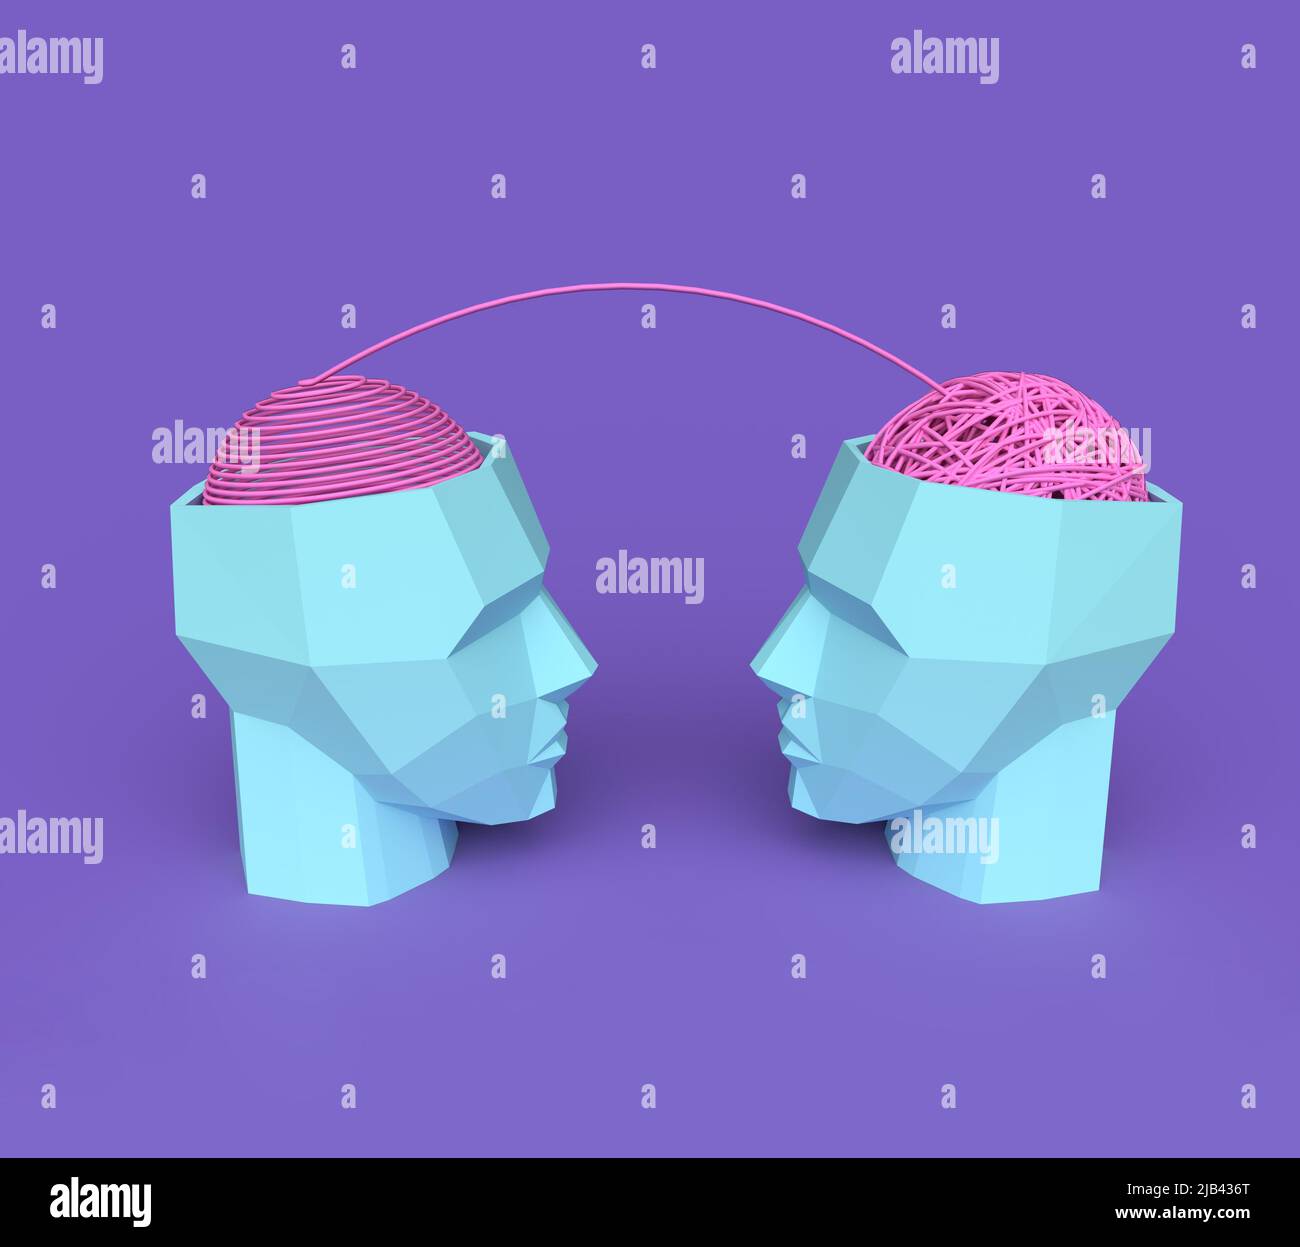 decoding and understanding problem,  3d illustration  of face to face explanation Stock Photo